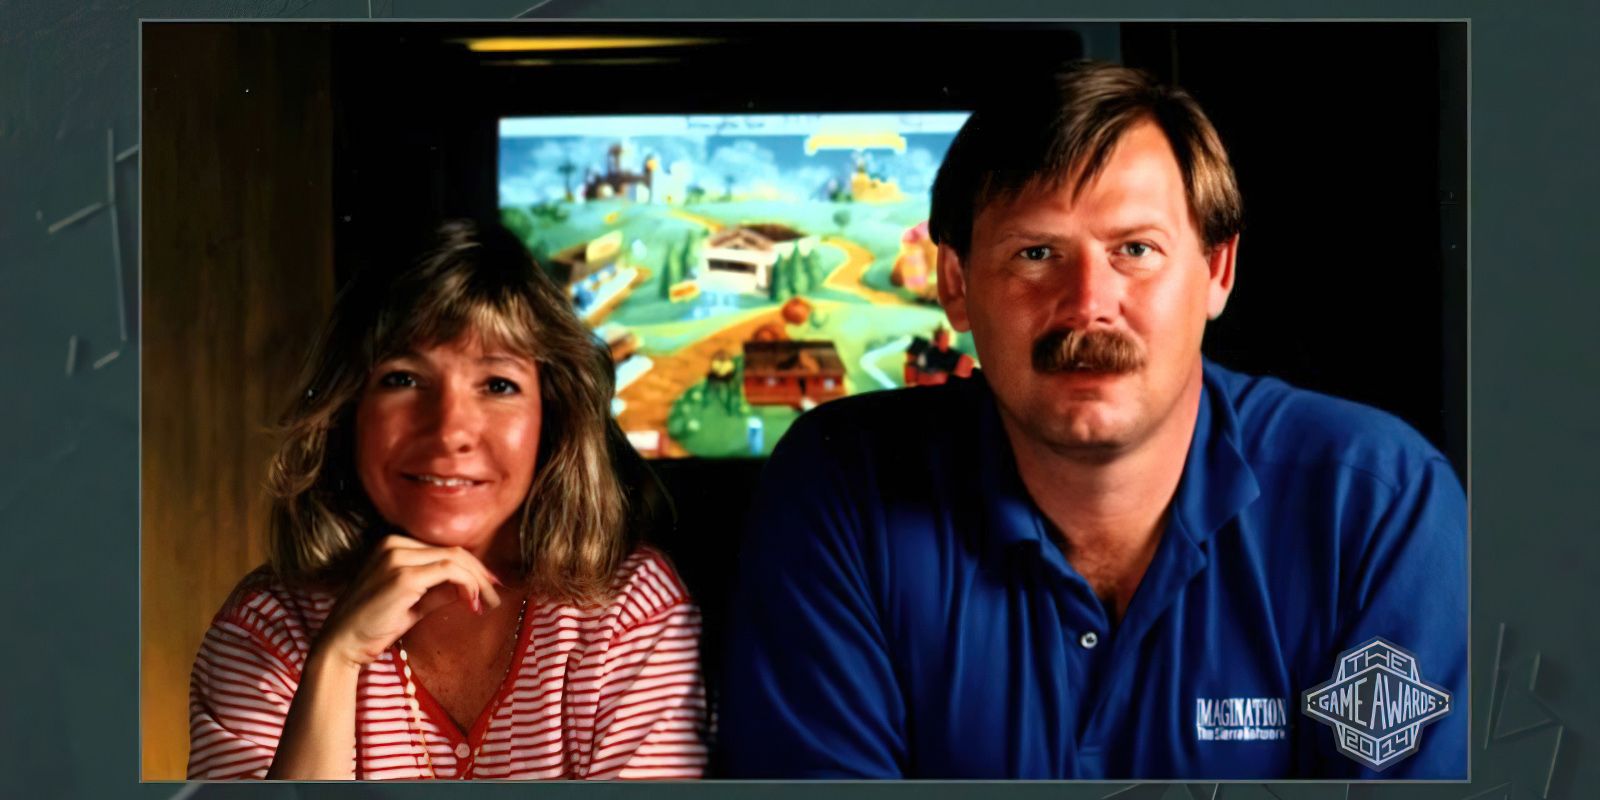 Sierra On-line is partially making a return as the founders of the company, Ken and Roberta Williams, are secretly working on a new video game. Out of